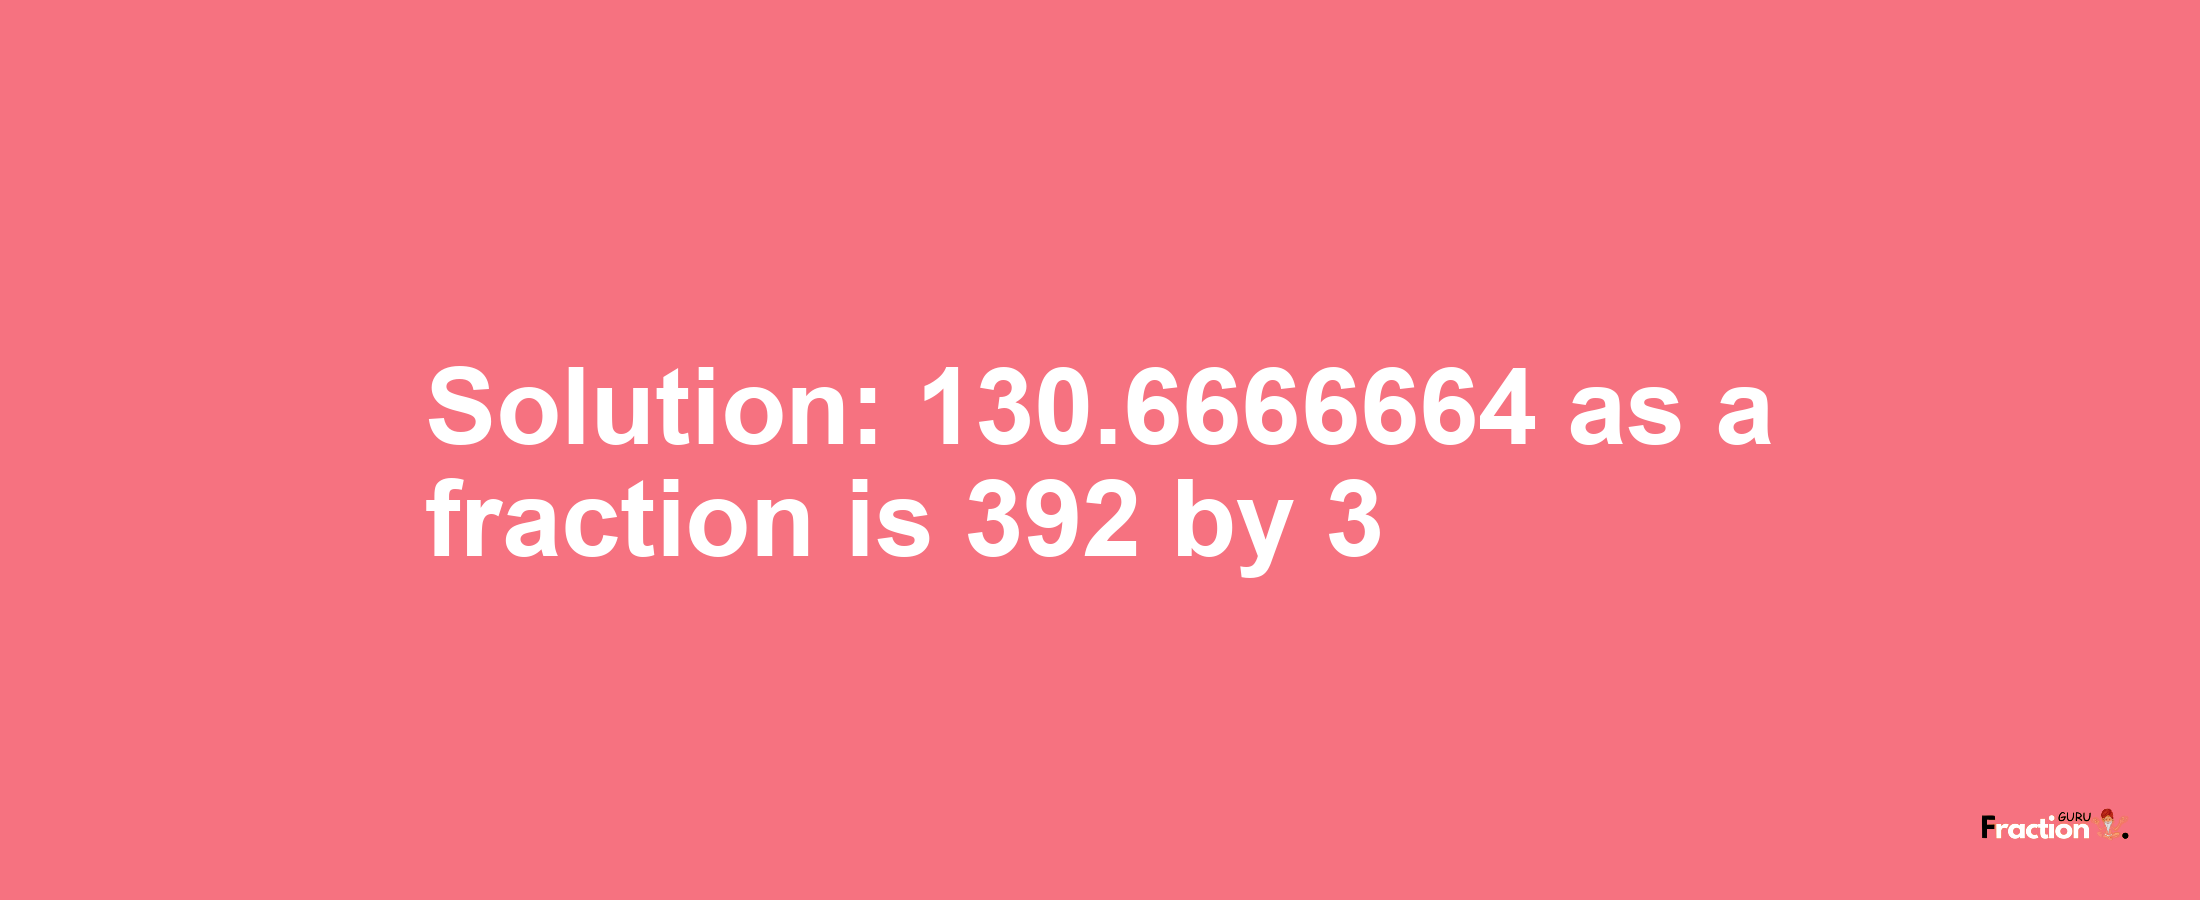 Solution:130.6666664 as a fraction is 392/3